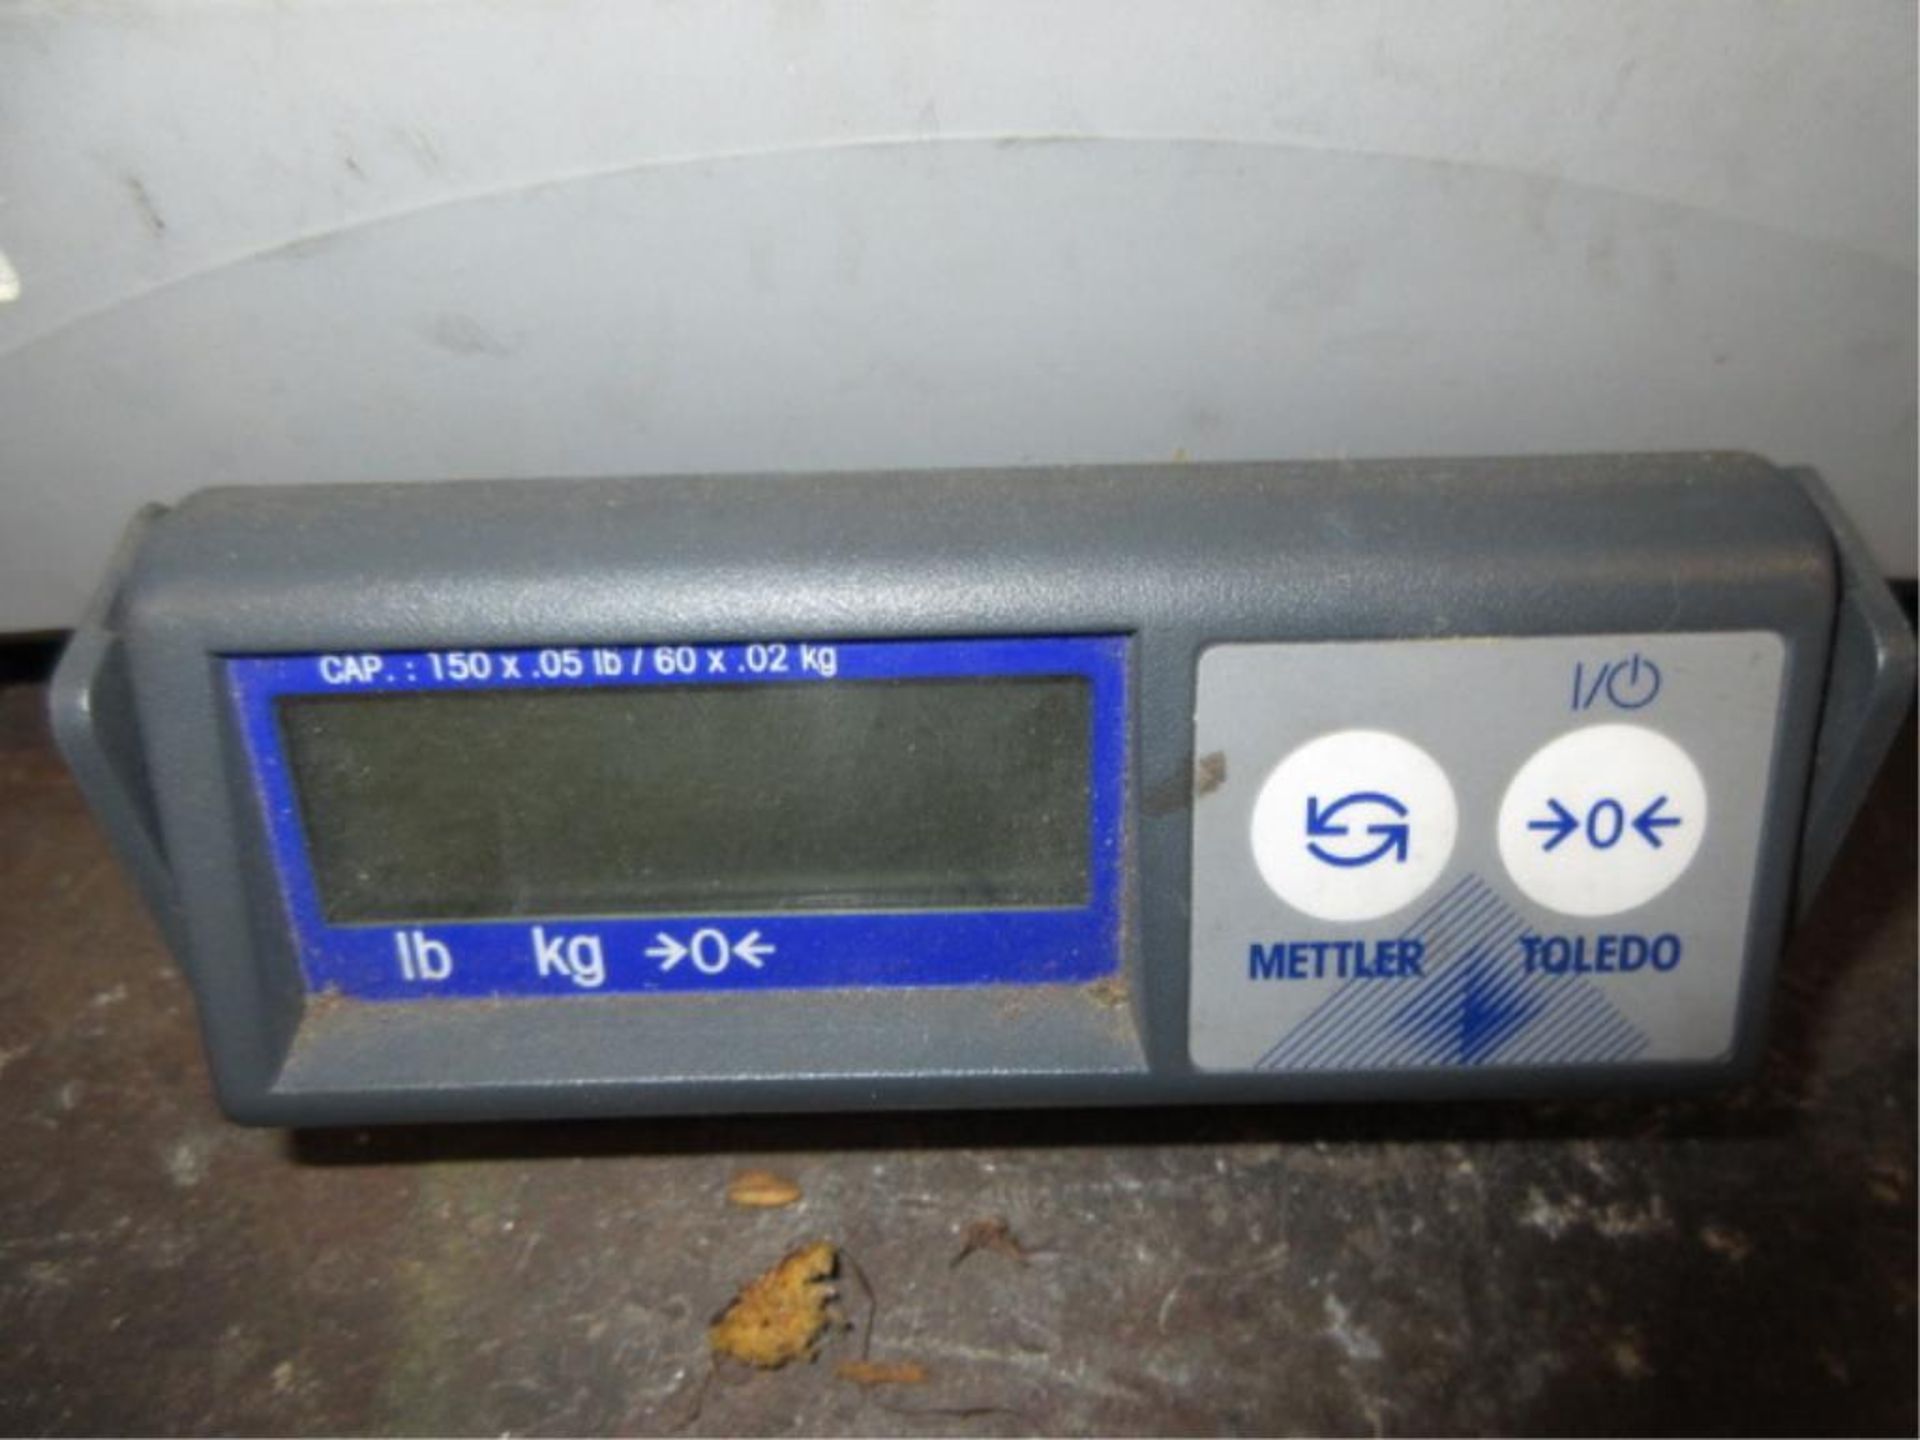 Bench Scale. Mettler Toledo Electronic Bench Scale, 150 x .05lb / 60 x .02kg capacity, USB - Image 2 of 3